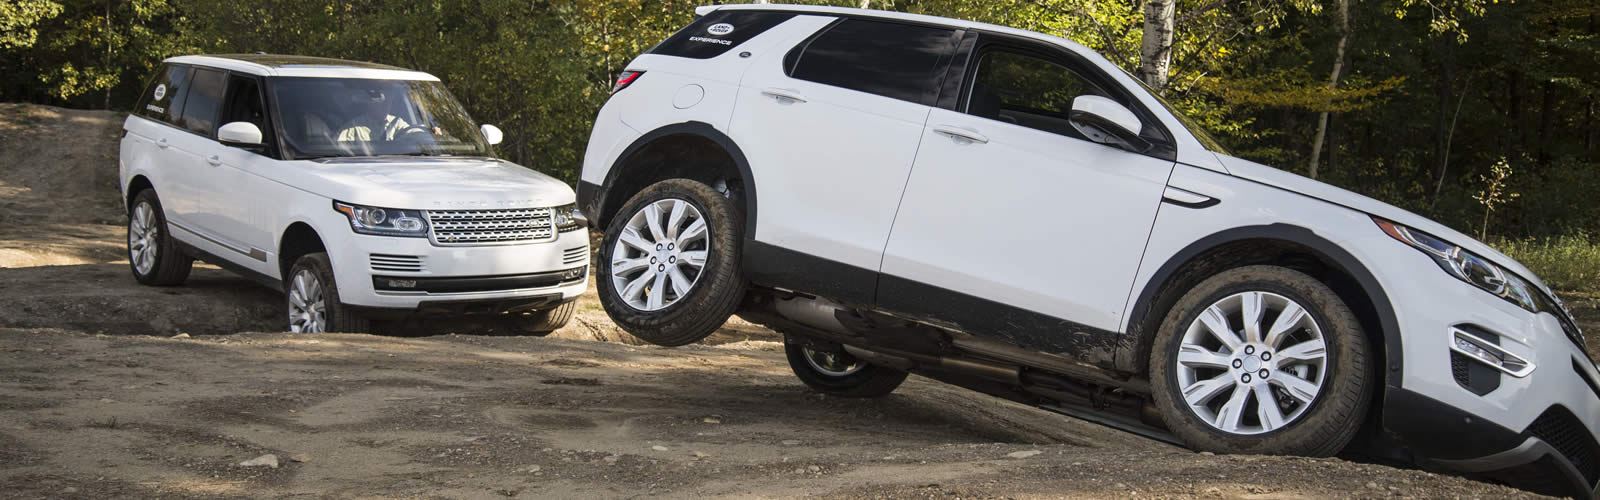 GAIN A GREATER UNDERSTANDING OF OFF-ROAD VEHICLE CONTROL.<br><br>